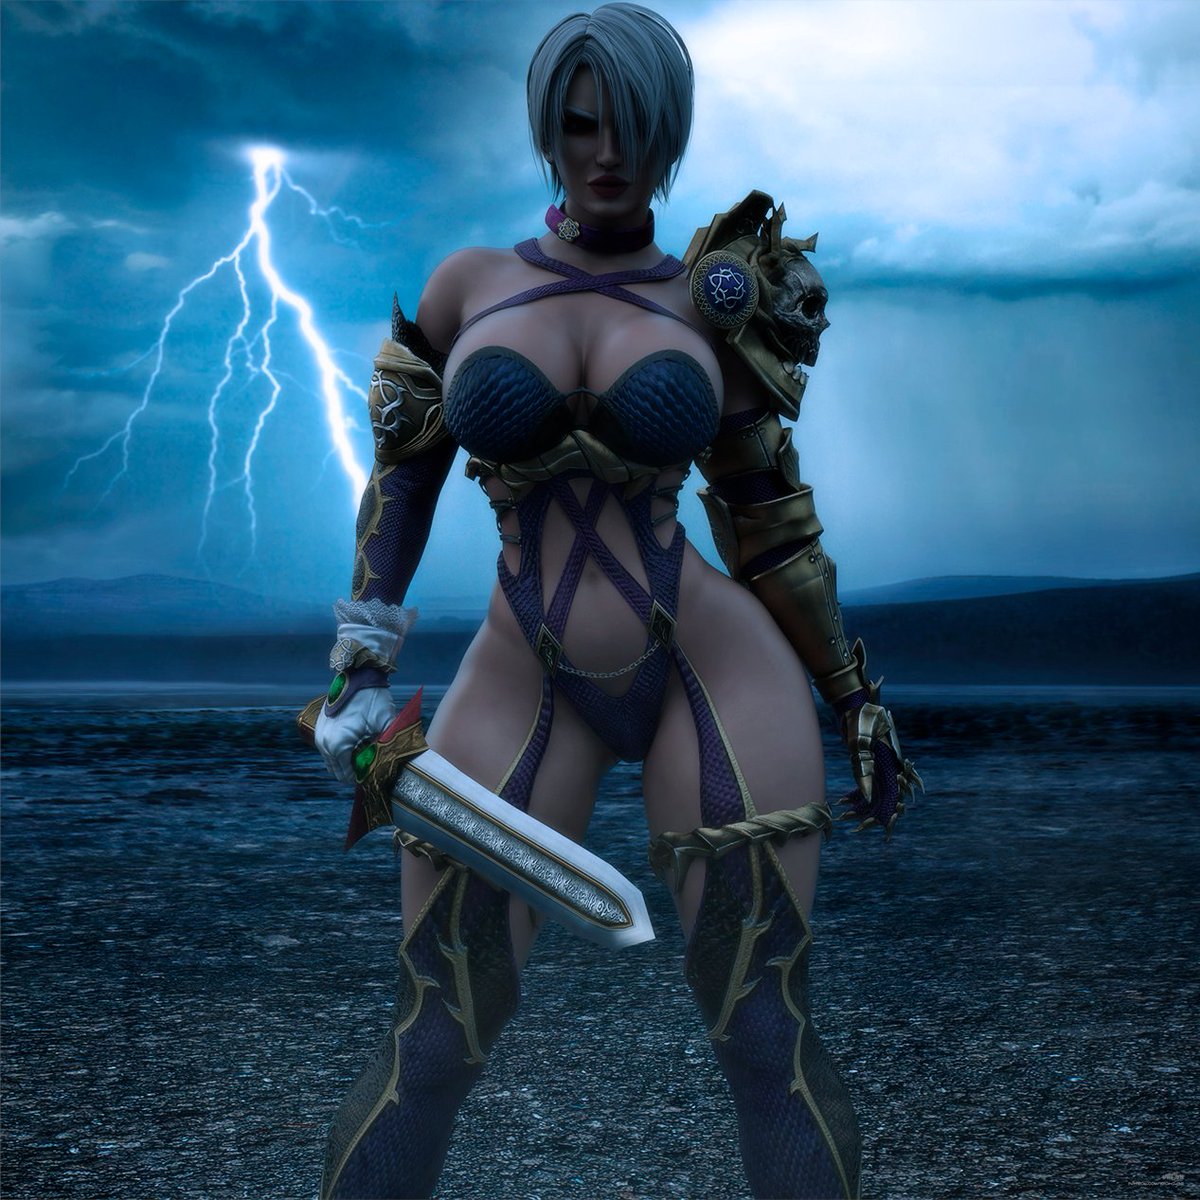 Ivy Valentine Hot And Sexy 1 - More Images, Poses and Quality on: https